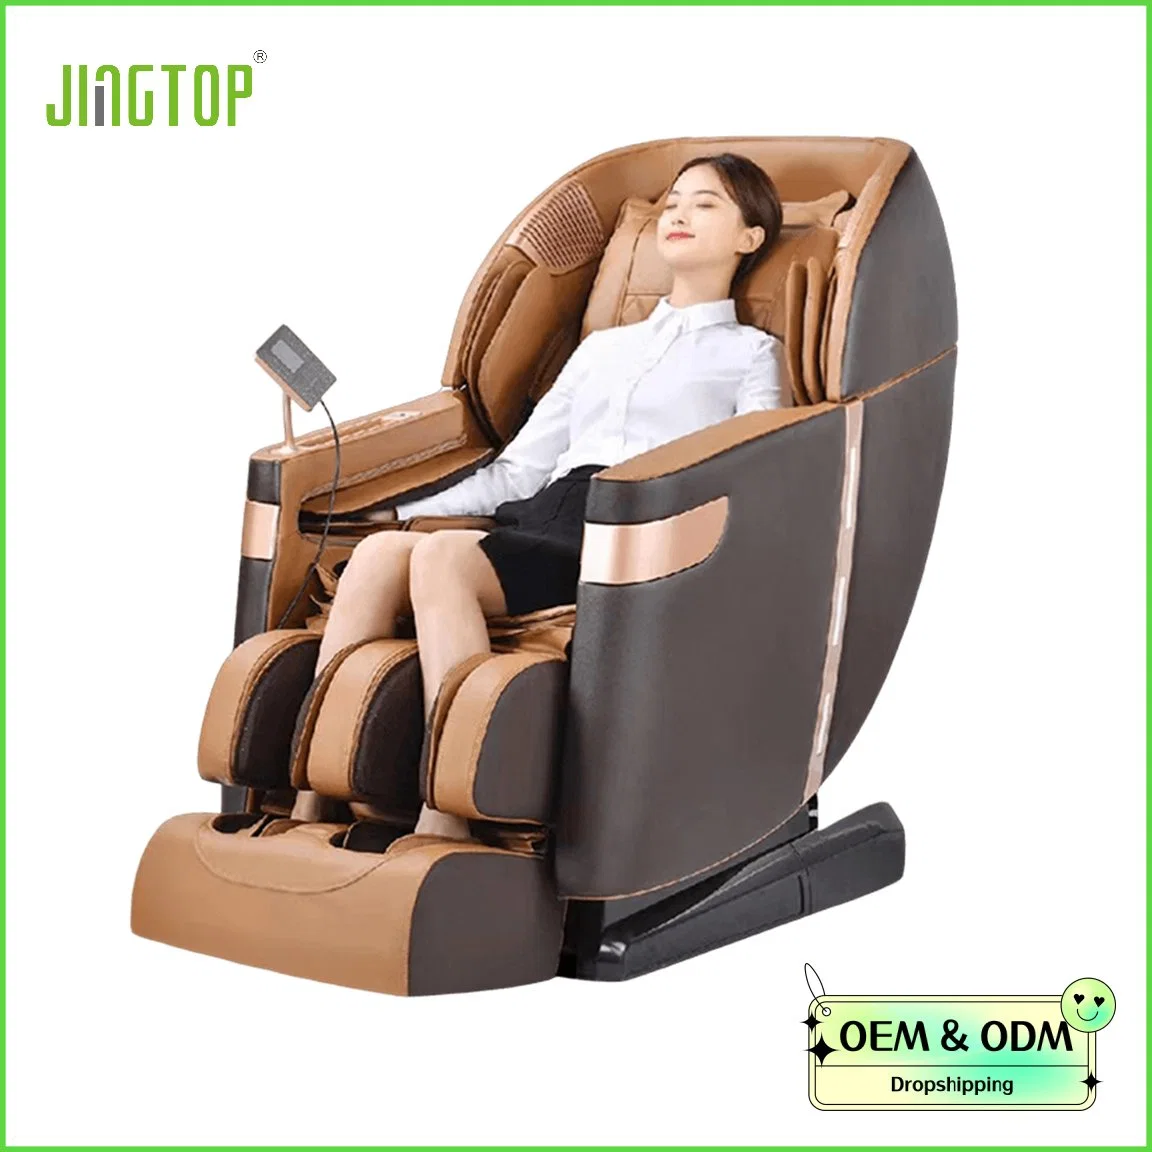 Jingtop Factory Direct Pain Stress Relief Robotic Top End Body Care Equipment Massage Chair